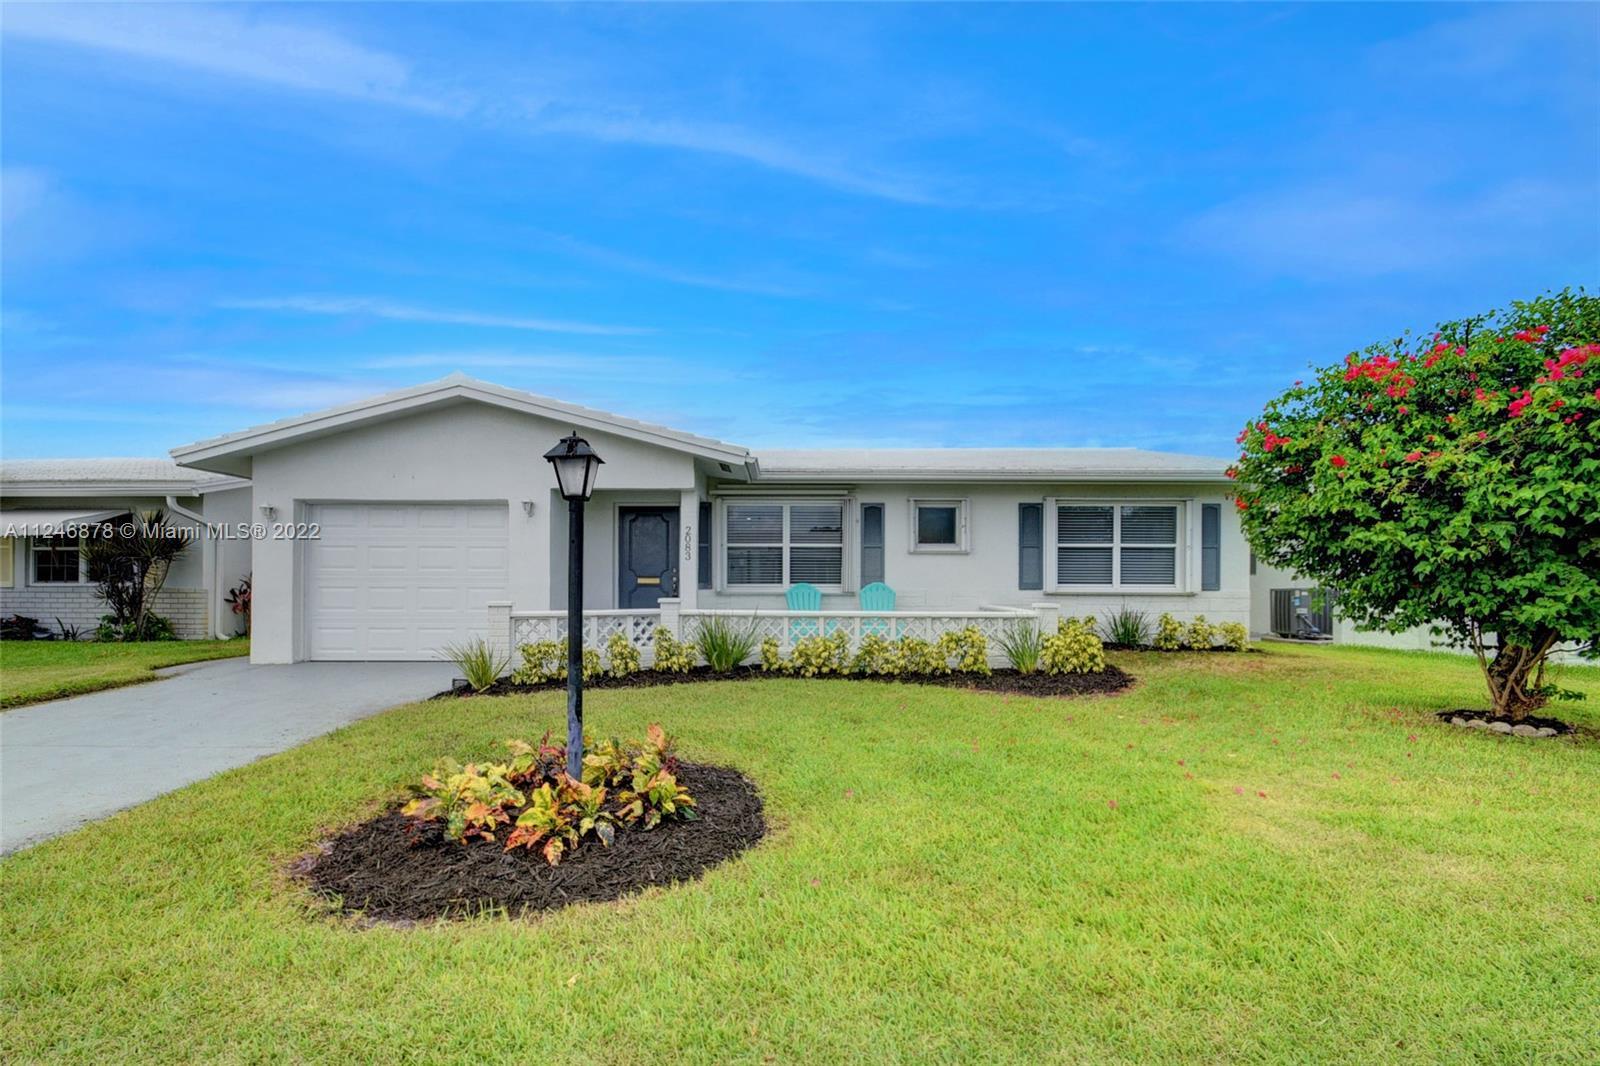 Fully remodeled and updated this lovely rancher in Leisureville is sure to please.  Stainless applia